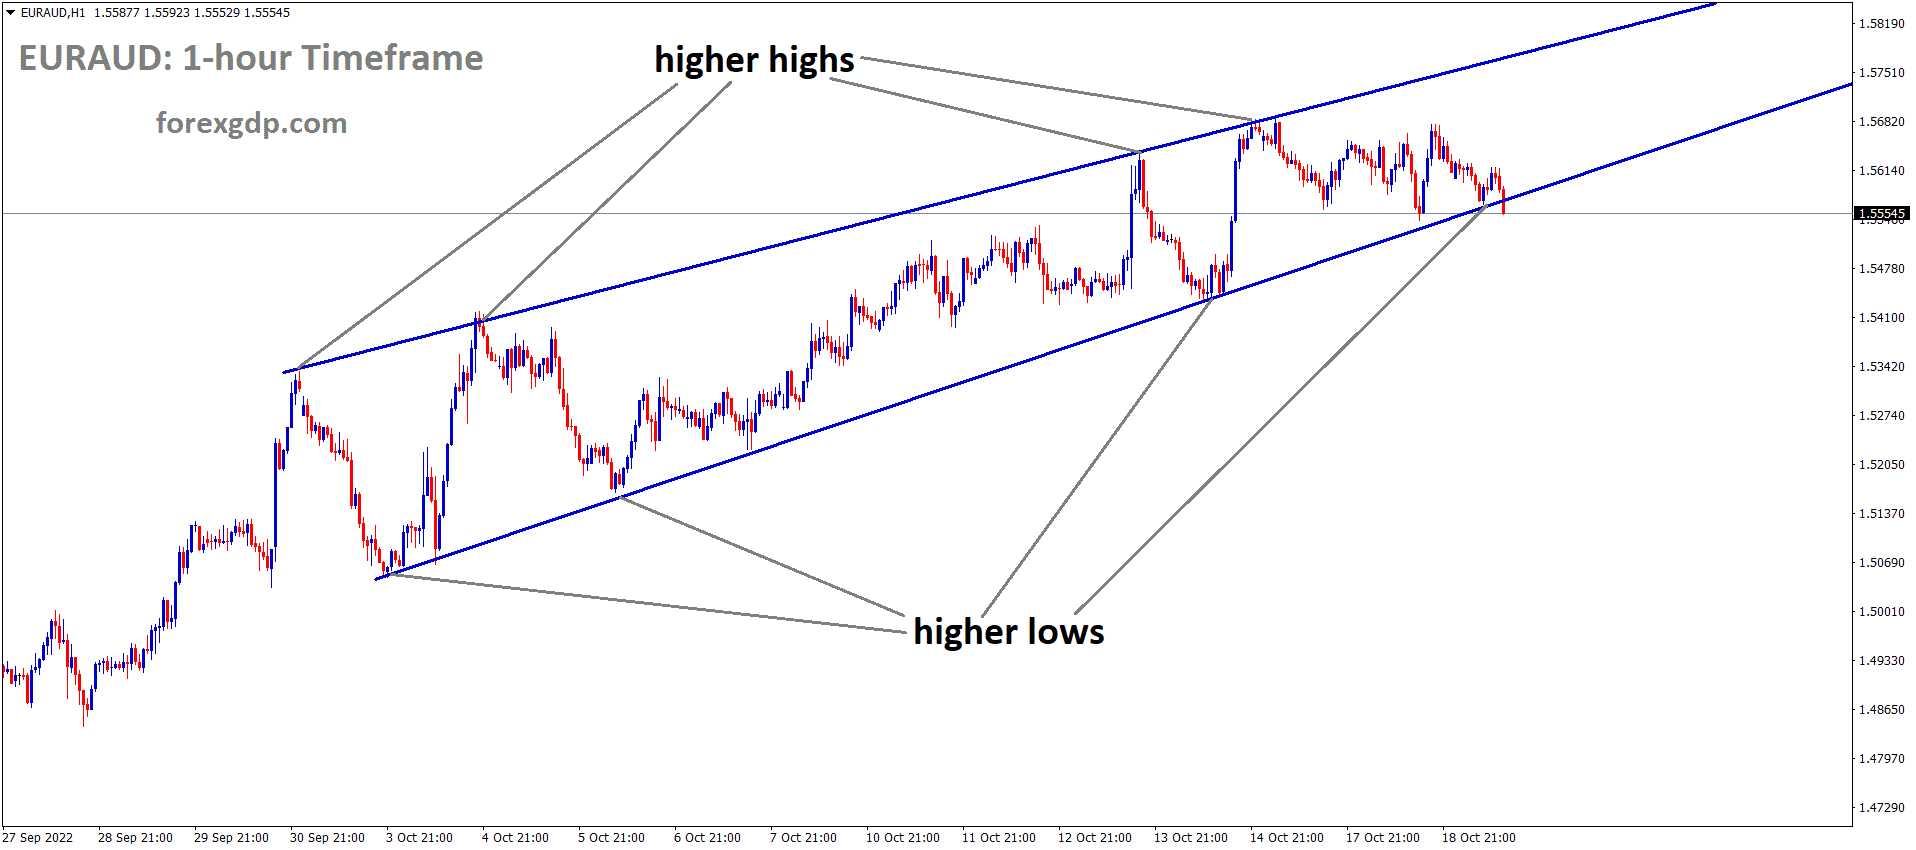 EURAUD is moving in the Rising wedge pattern and the market has reached the higher low area of the pattern